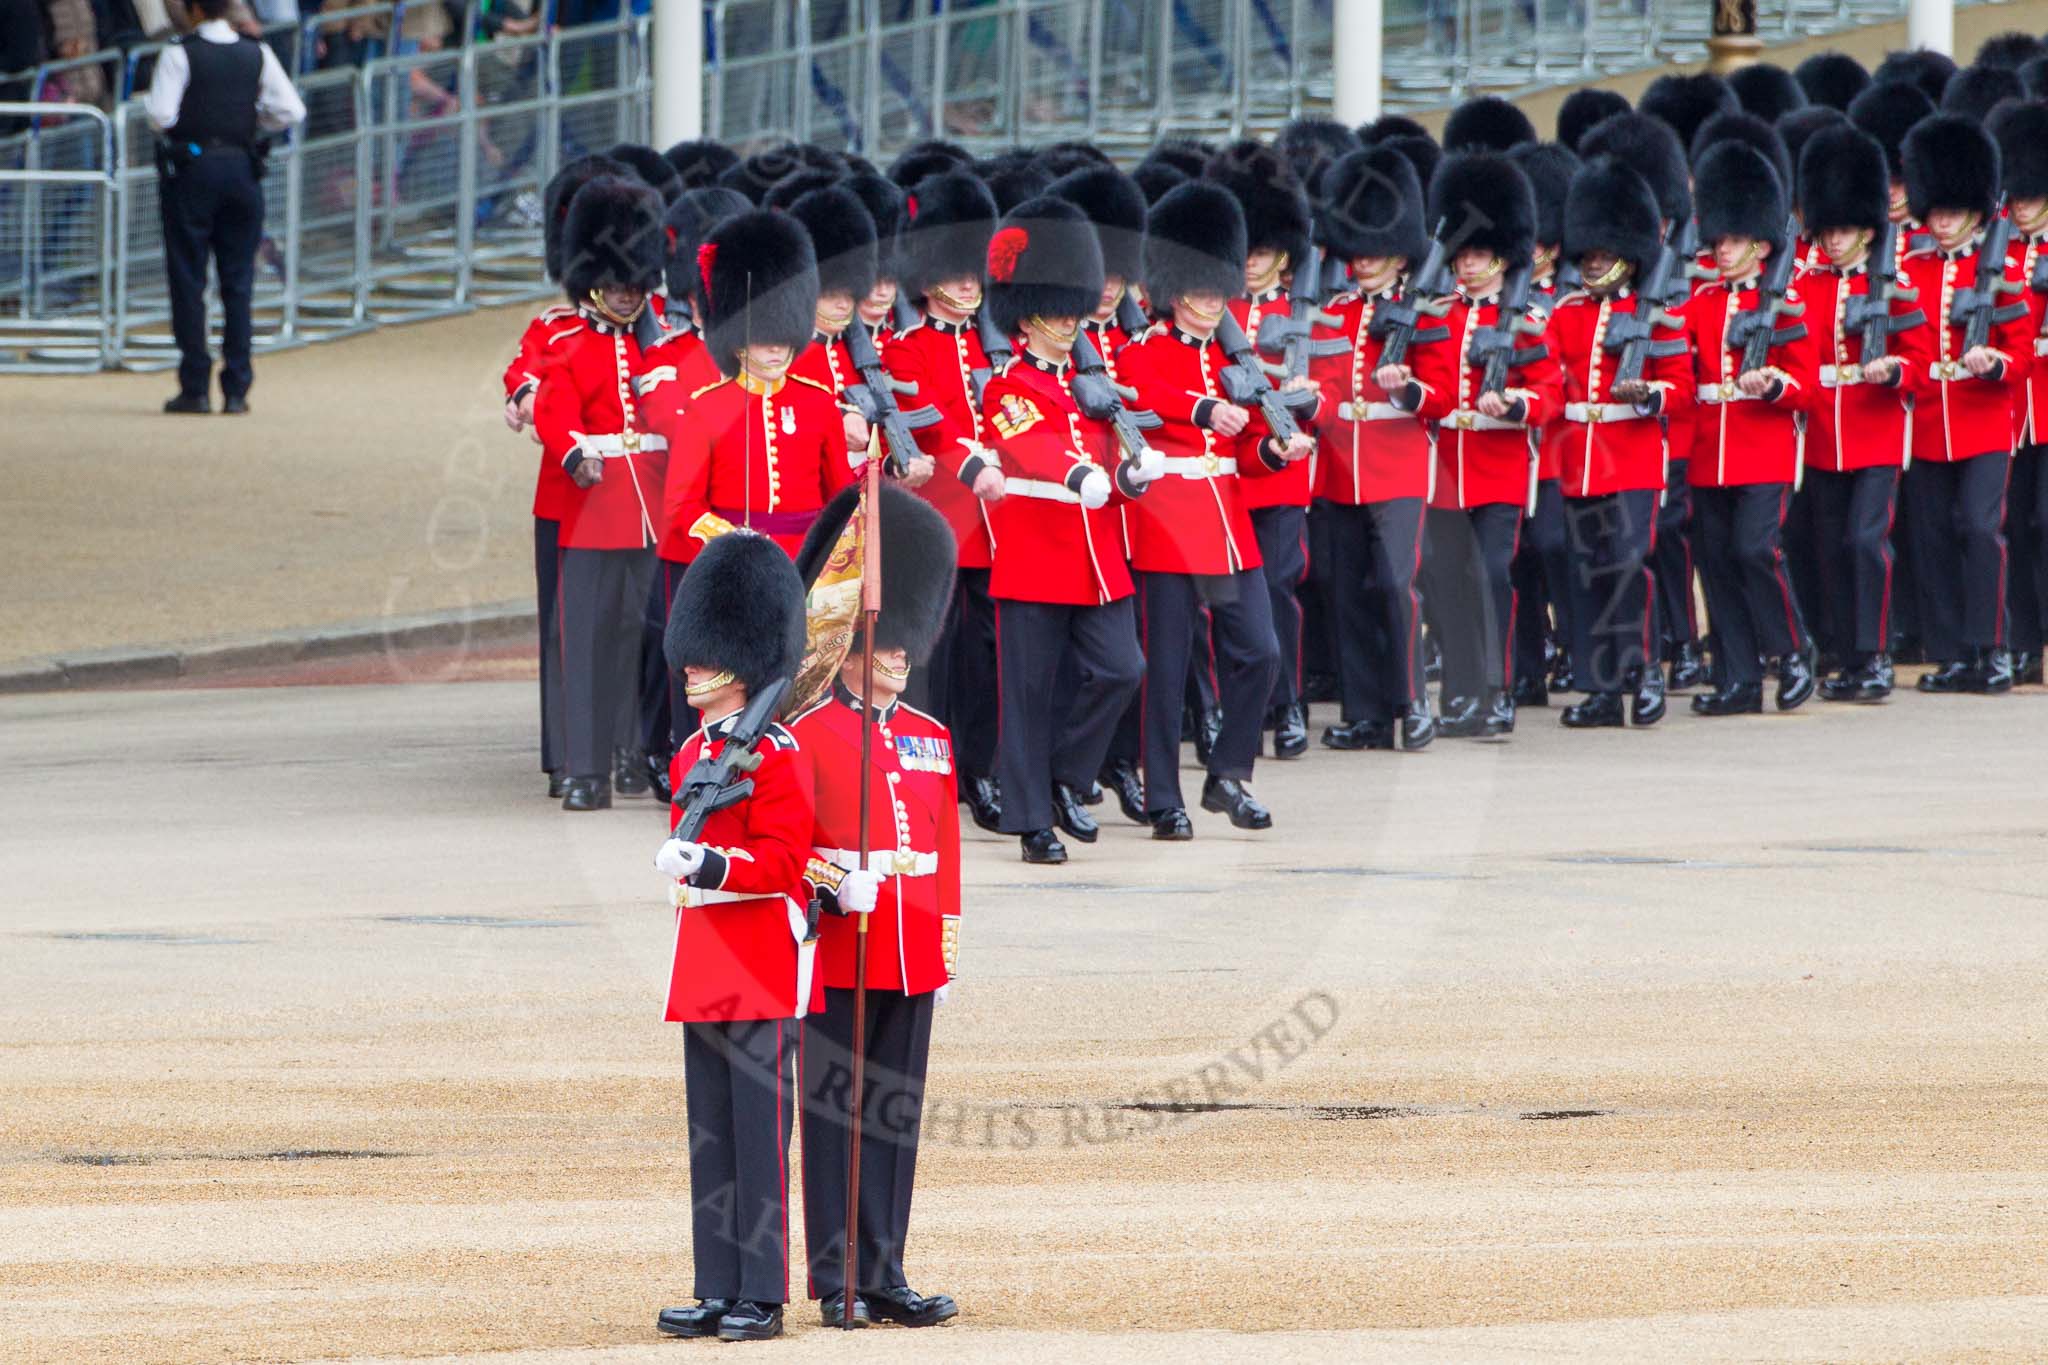 Major General's Review 2013: No. 6 Guard, No. 7 Company Coldstream Guards are arriving from The Mall, and turning left onto Horse Guards Parade..
Horse Guards Parade, Westminster,
London SW1,

United Kingdom,
on 01 June 2013 at 10:23, image #74